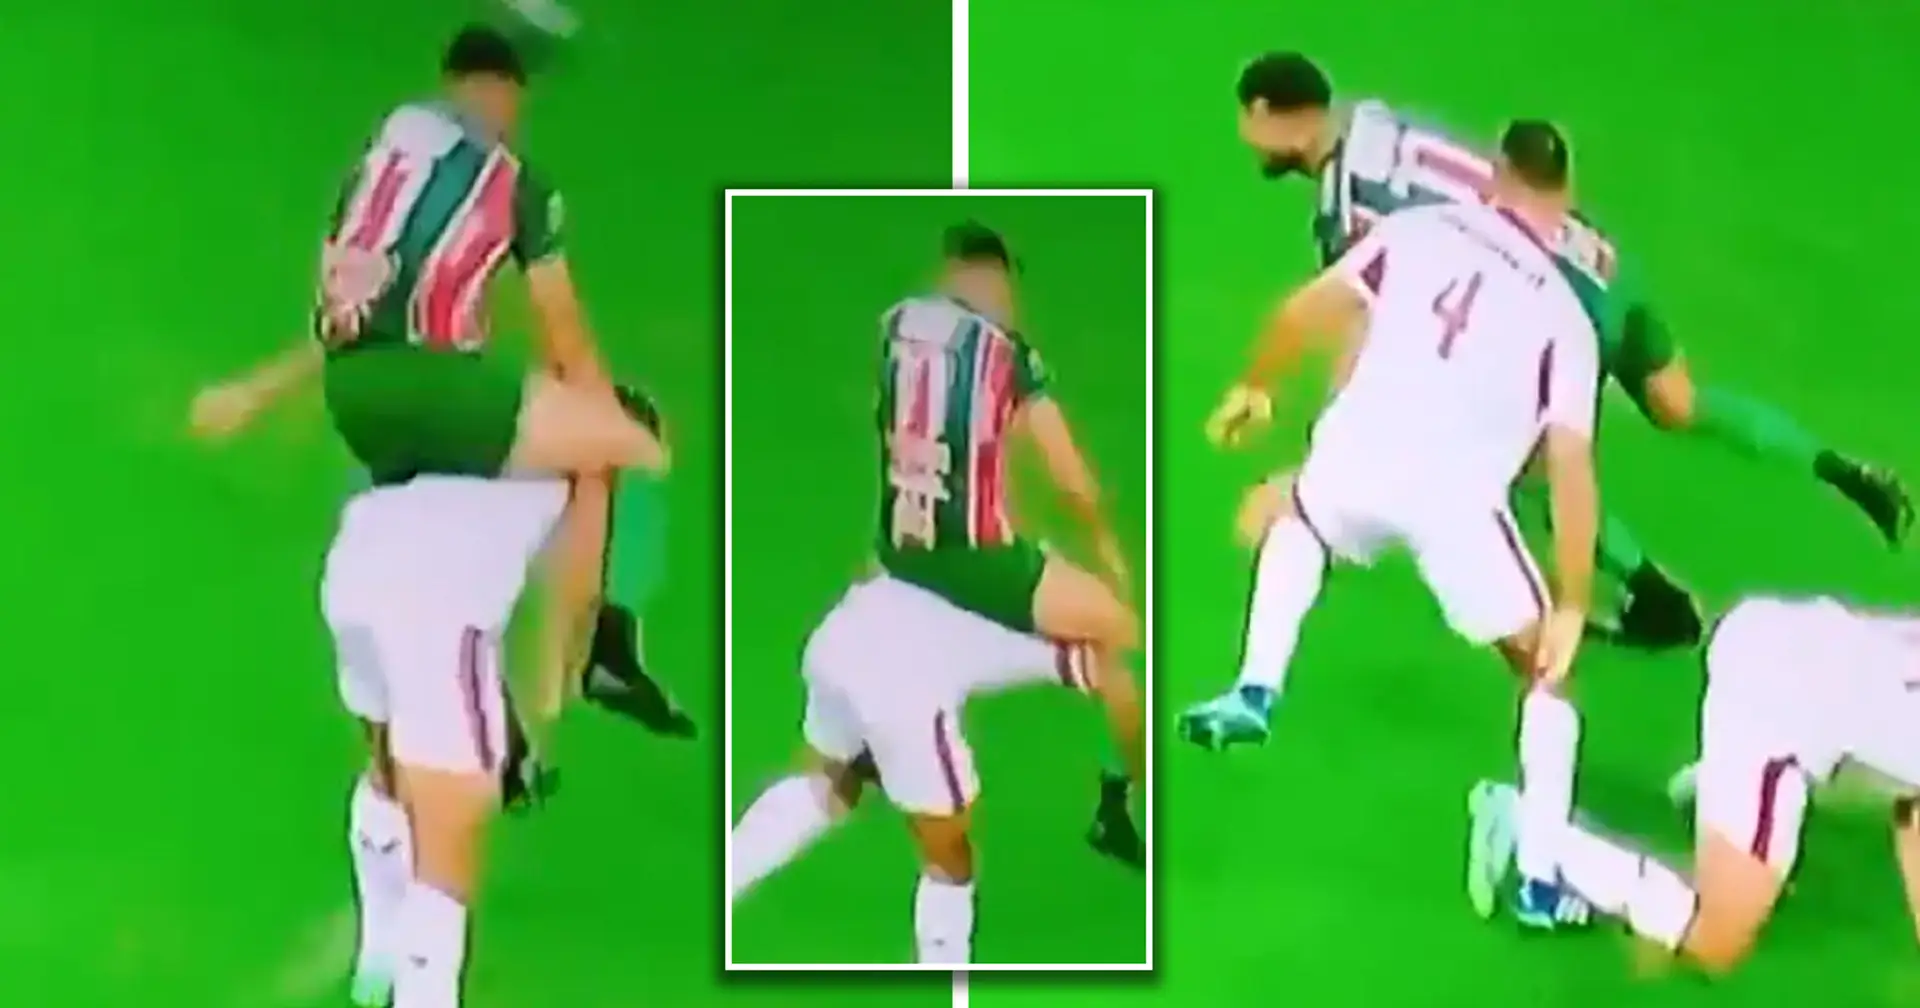 Two players sent off after one 'rides the other like a horse'